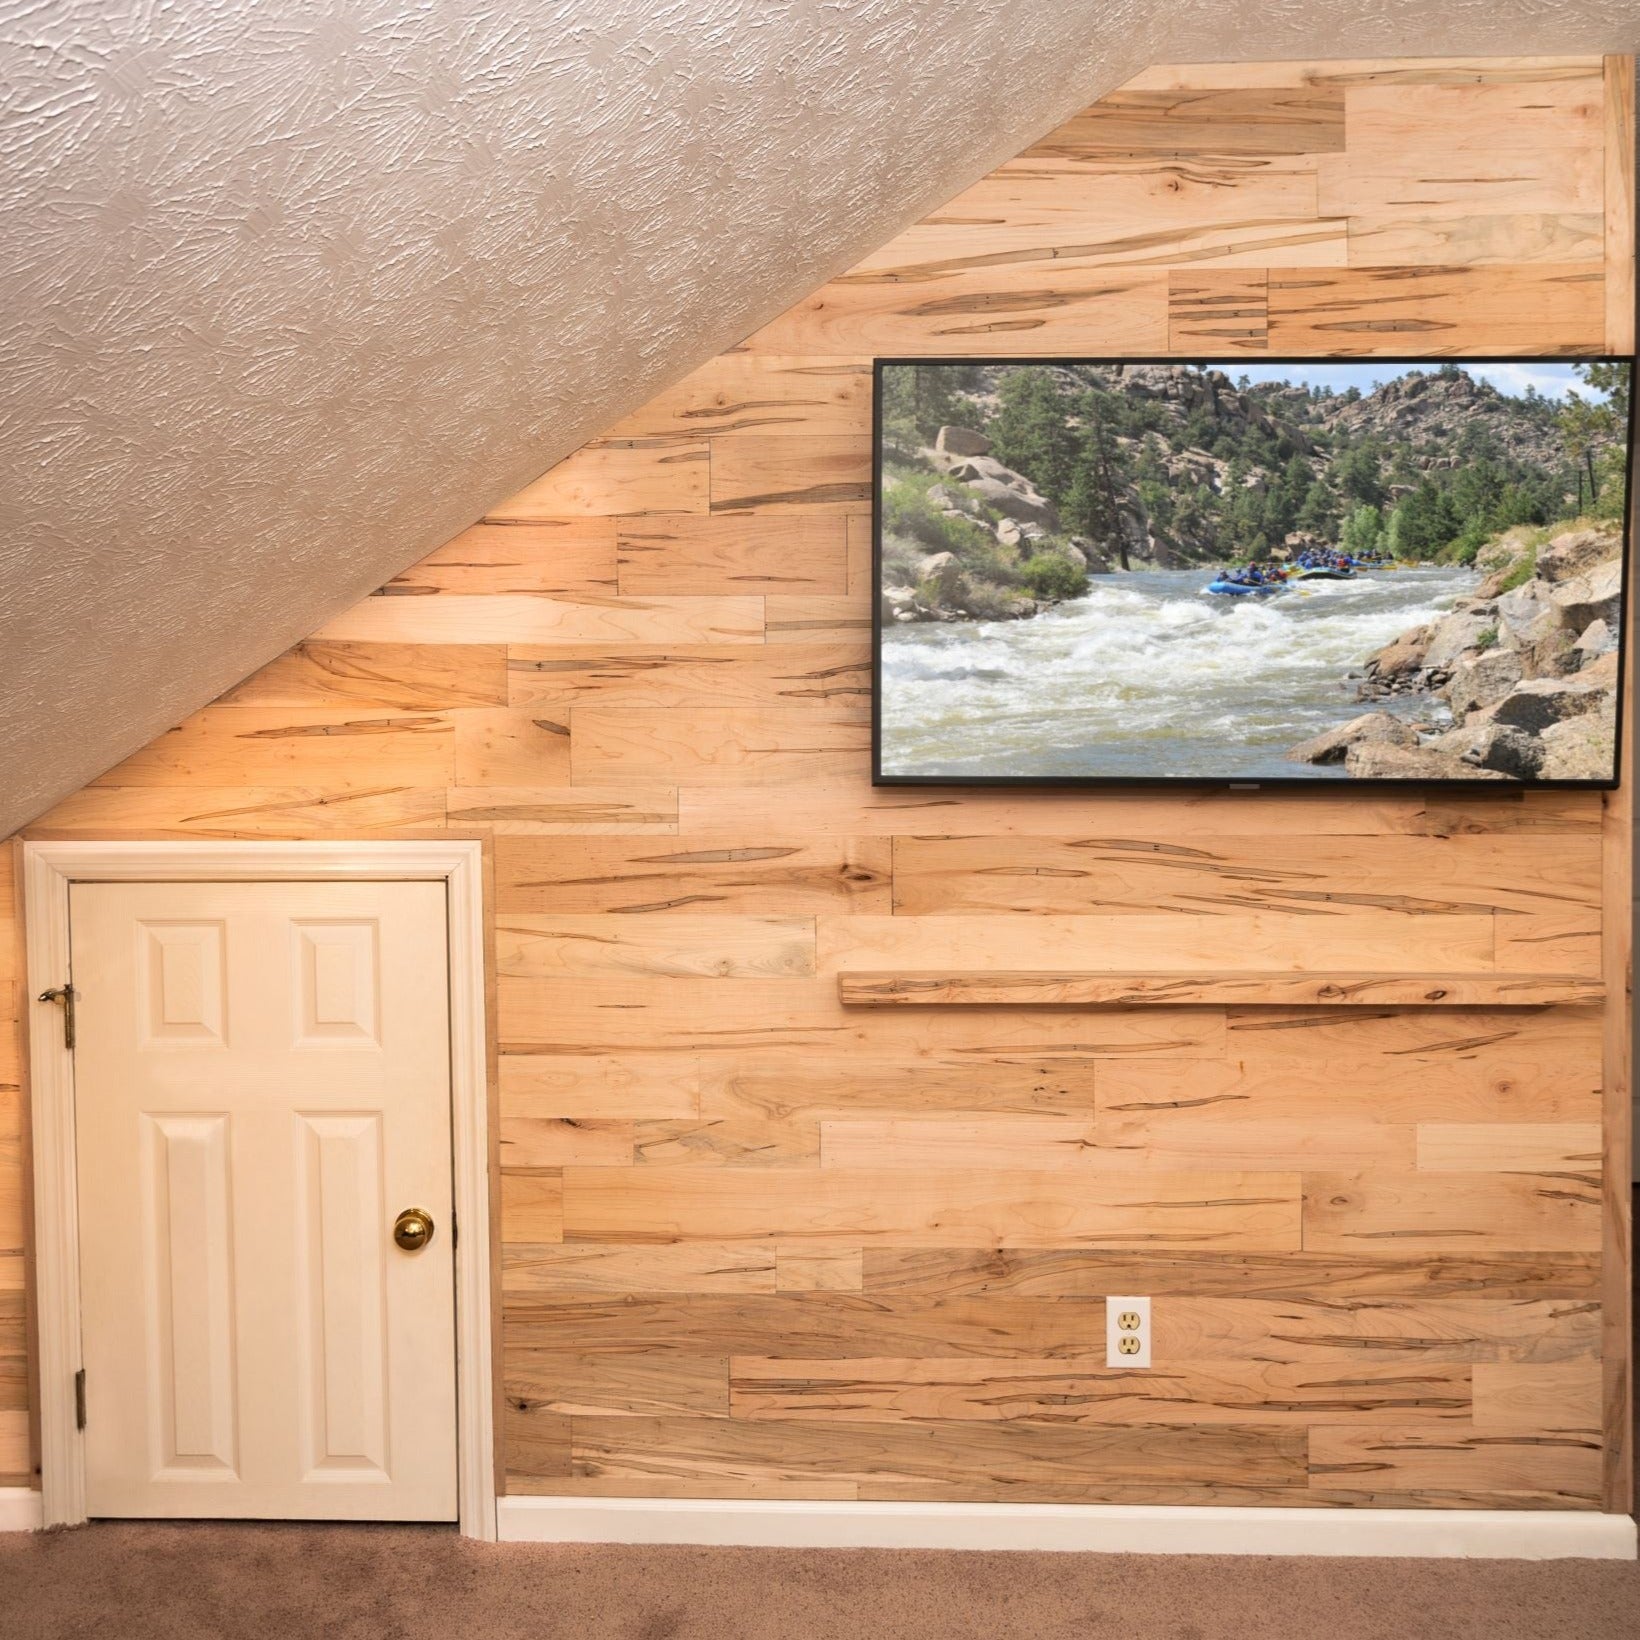 Ambrosia Maple wooden plank wall with a mounted TV.